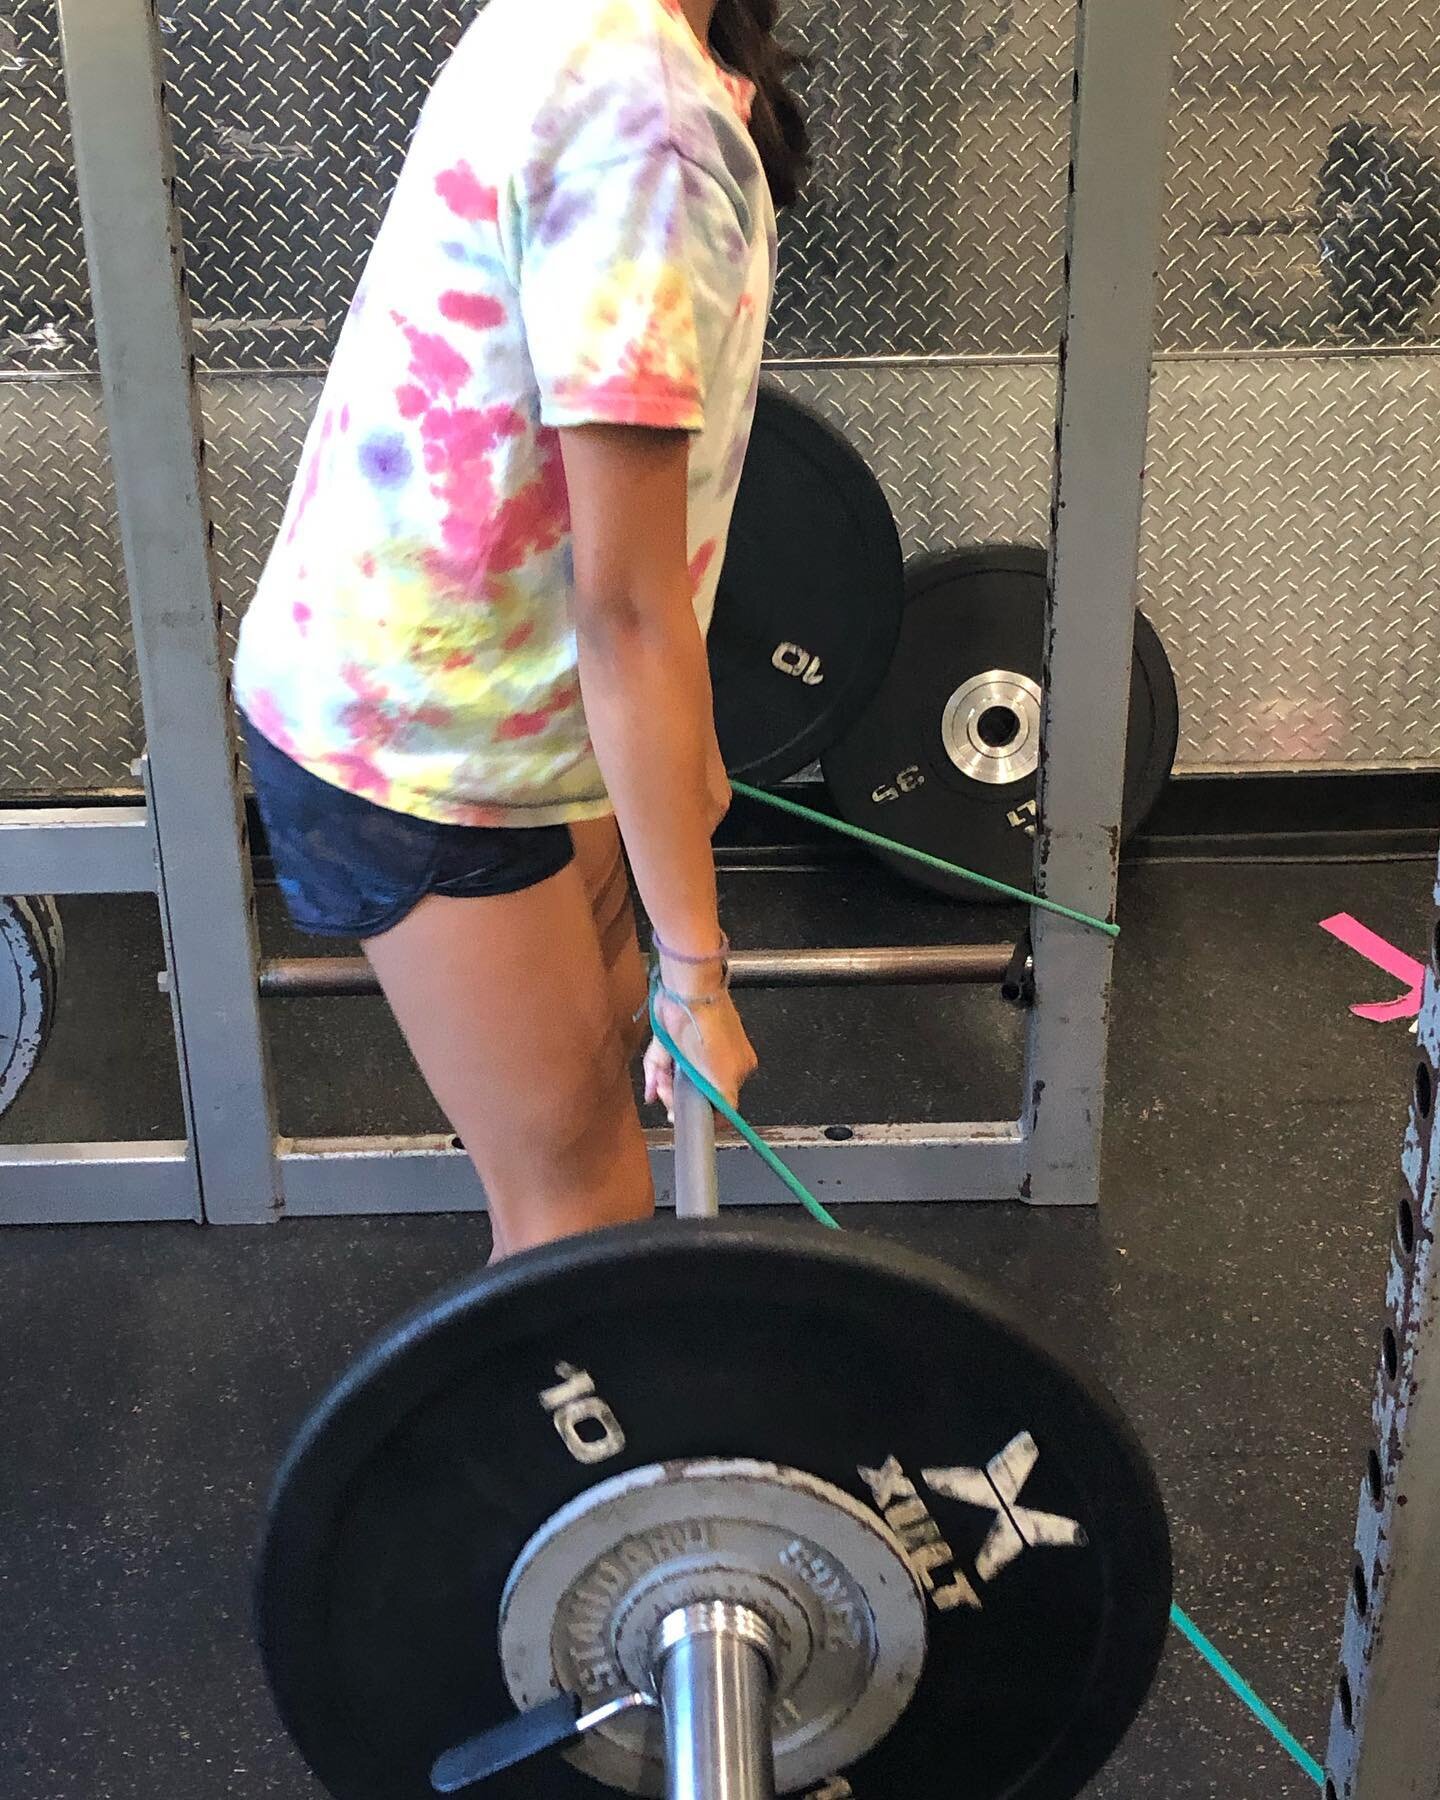 Improving&hellip;

There are frequently times in our lives when things are not going the way we want and we have to figure out how to get what we want.

2 quick examples:
1. My daughter wants help with her running form.  In my opinion, the deadlift i